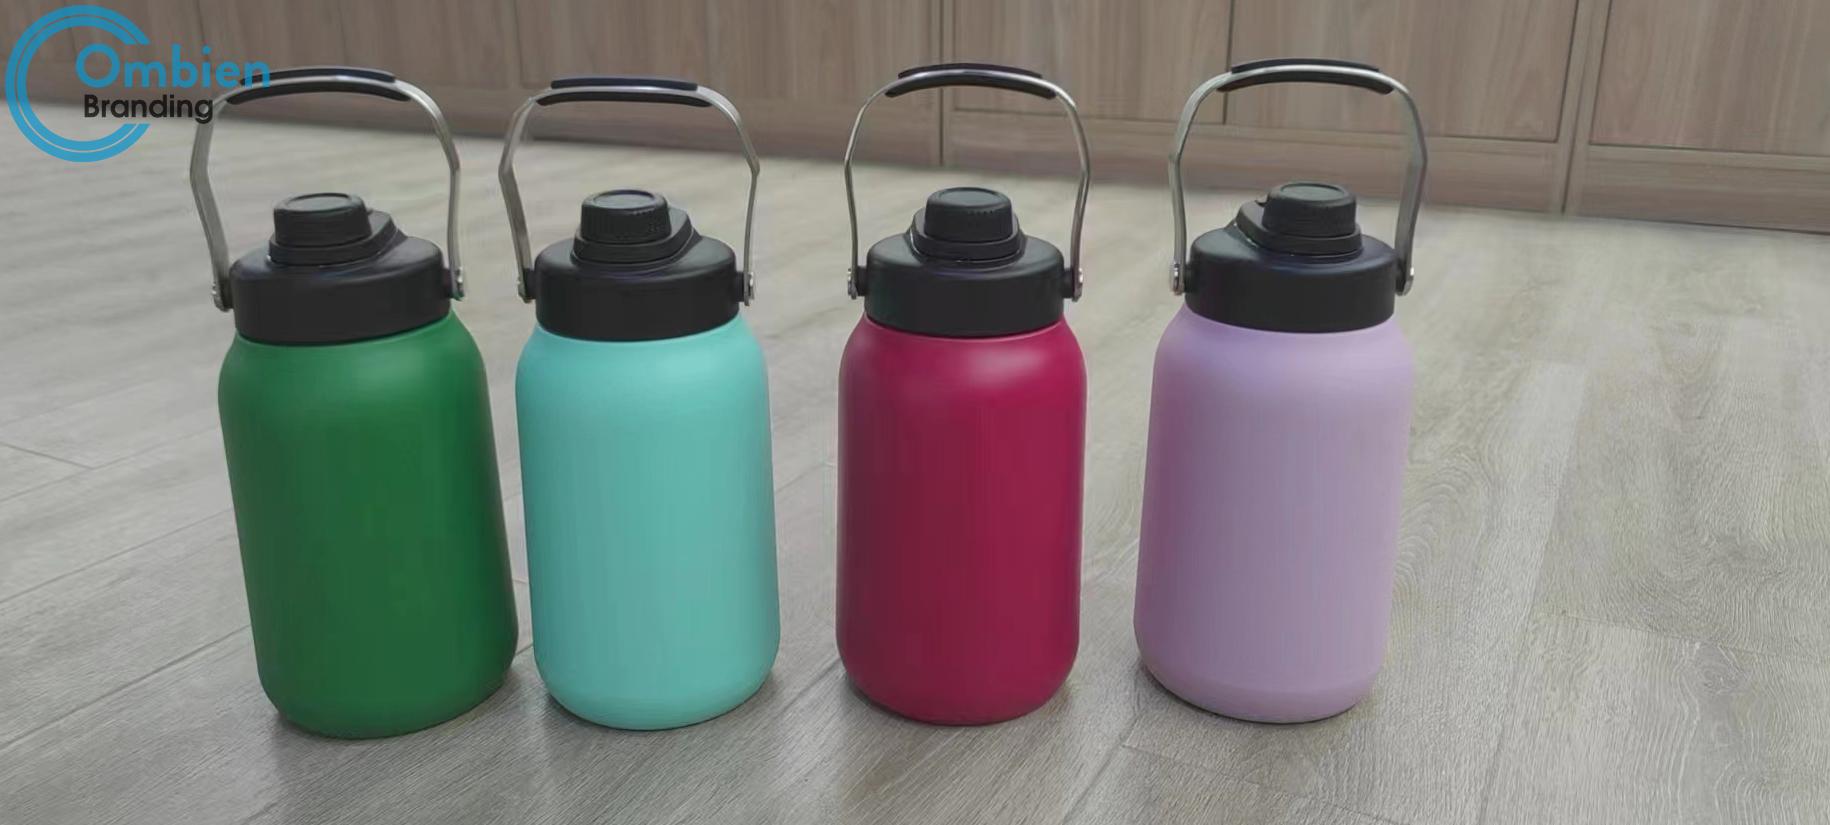 H69782 64 oz 128 oz Stainless Steel Water Bottle 